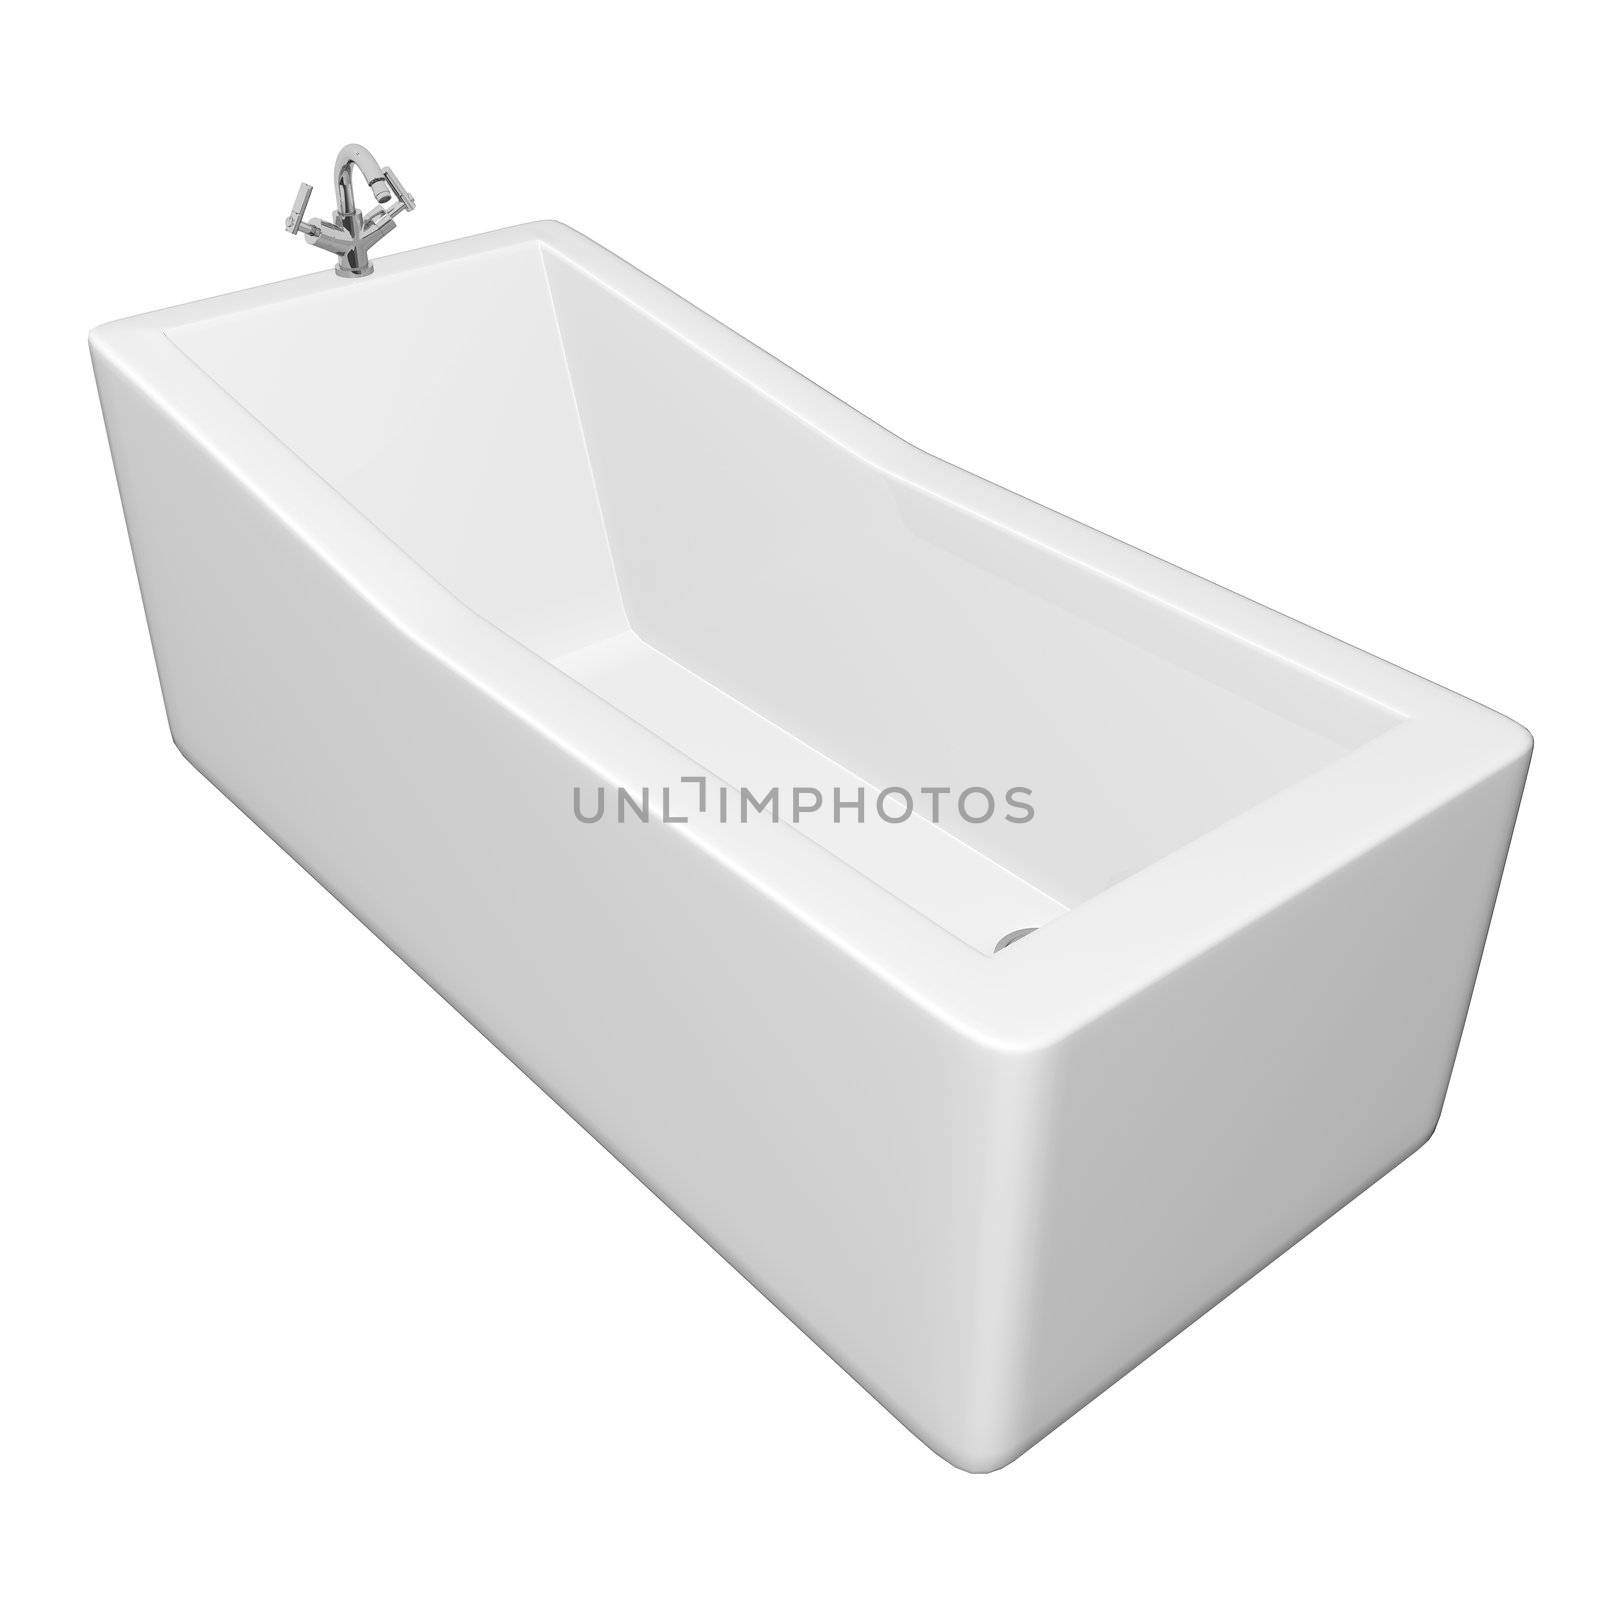 White rectangular bathtub with stainless steel by Morphart